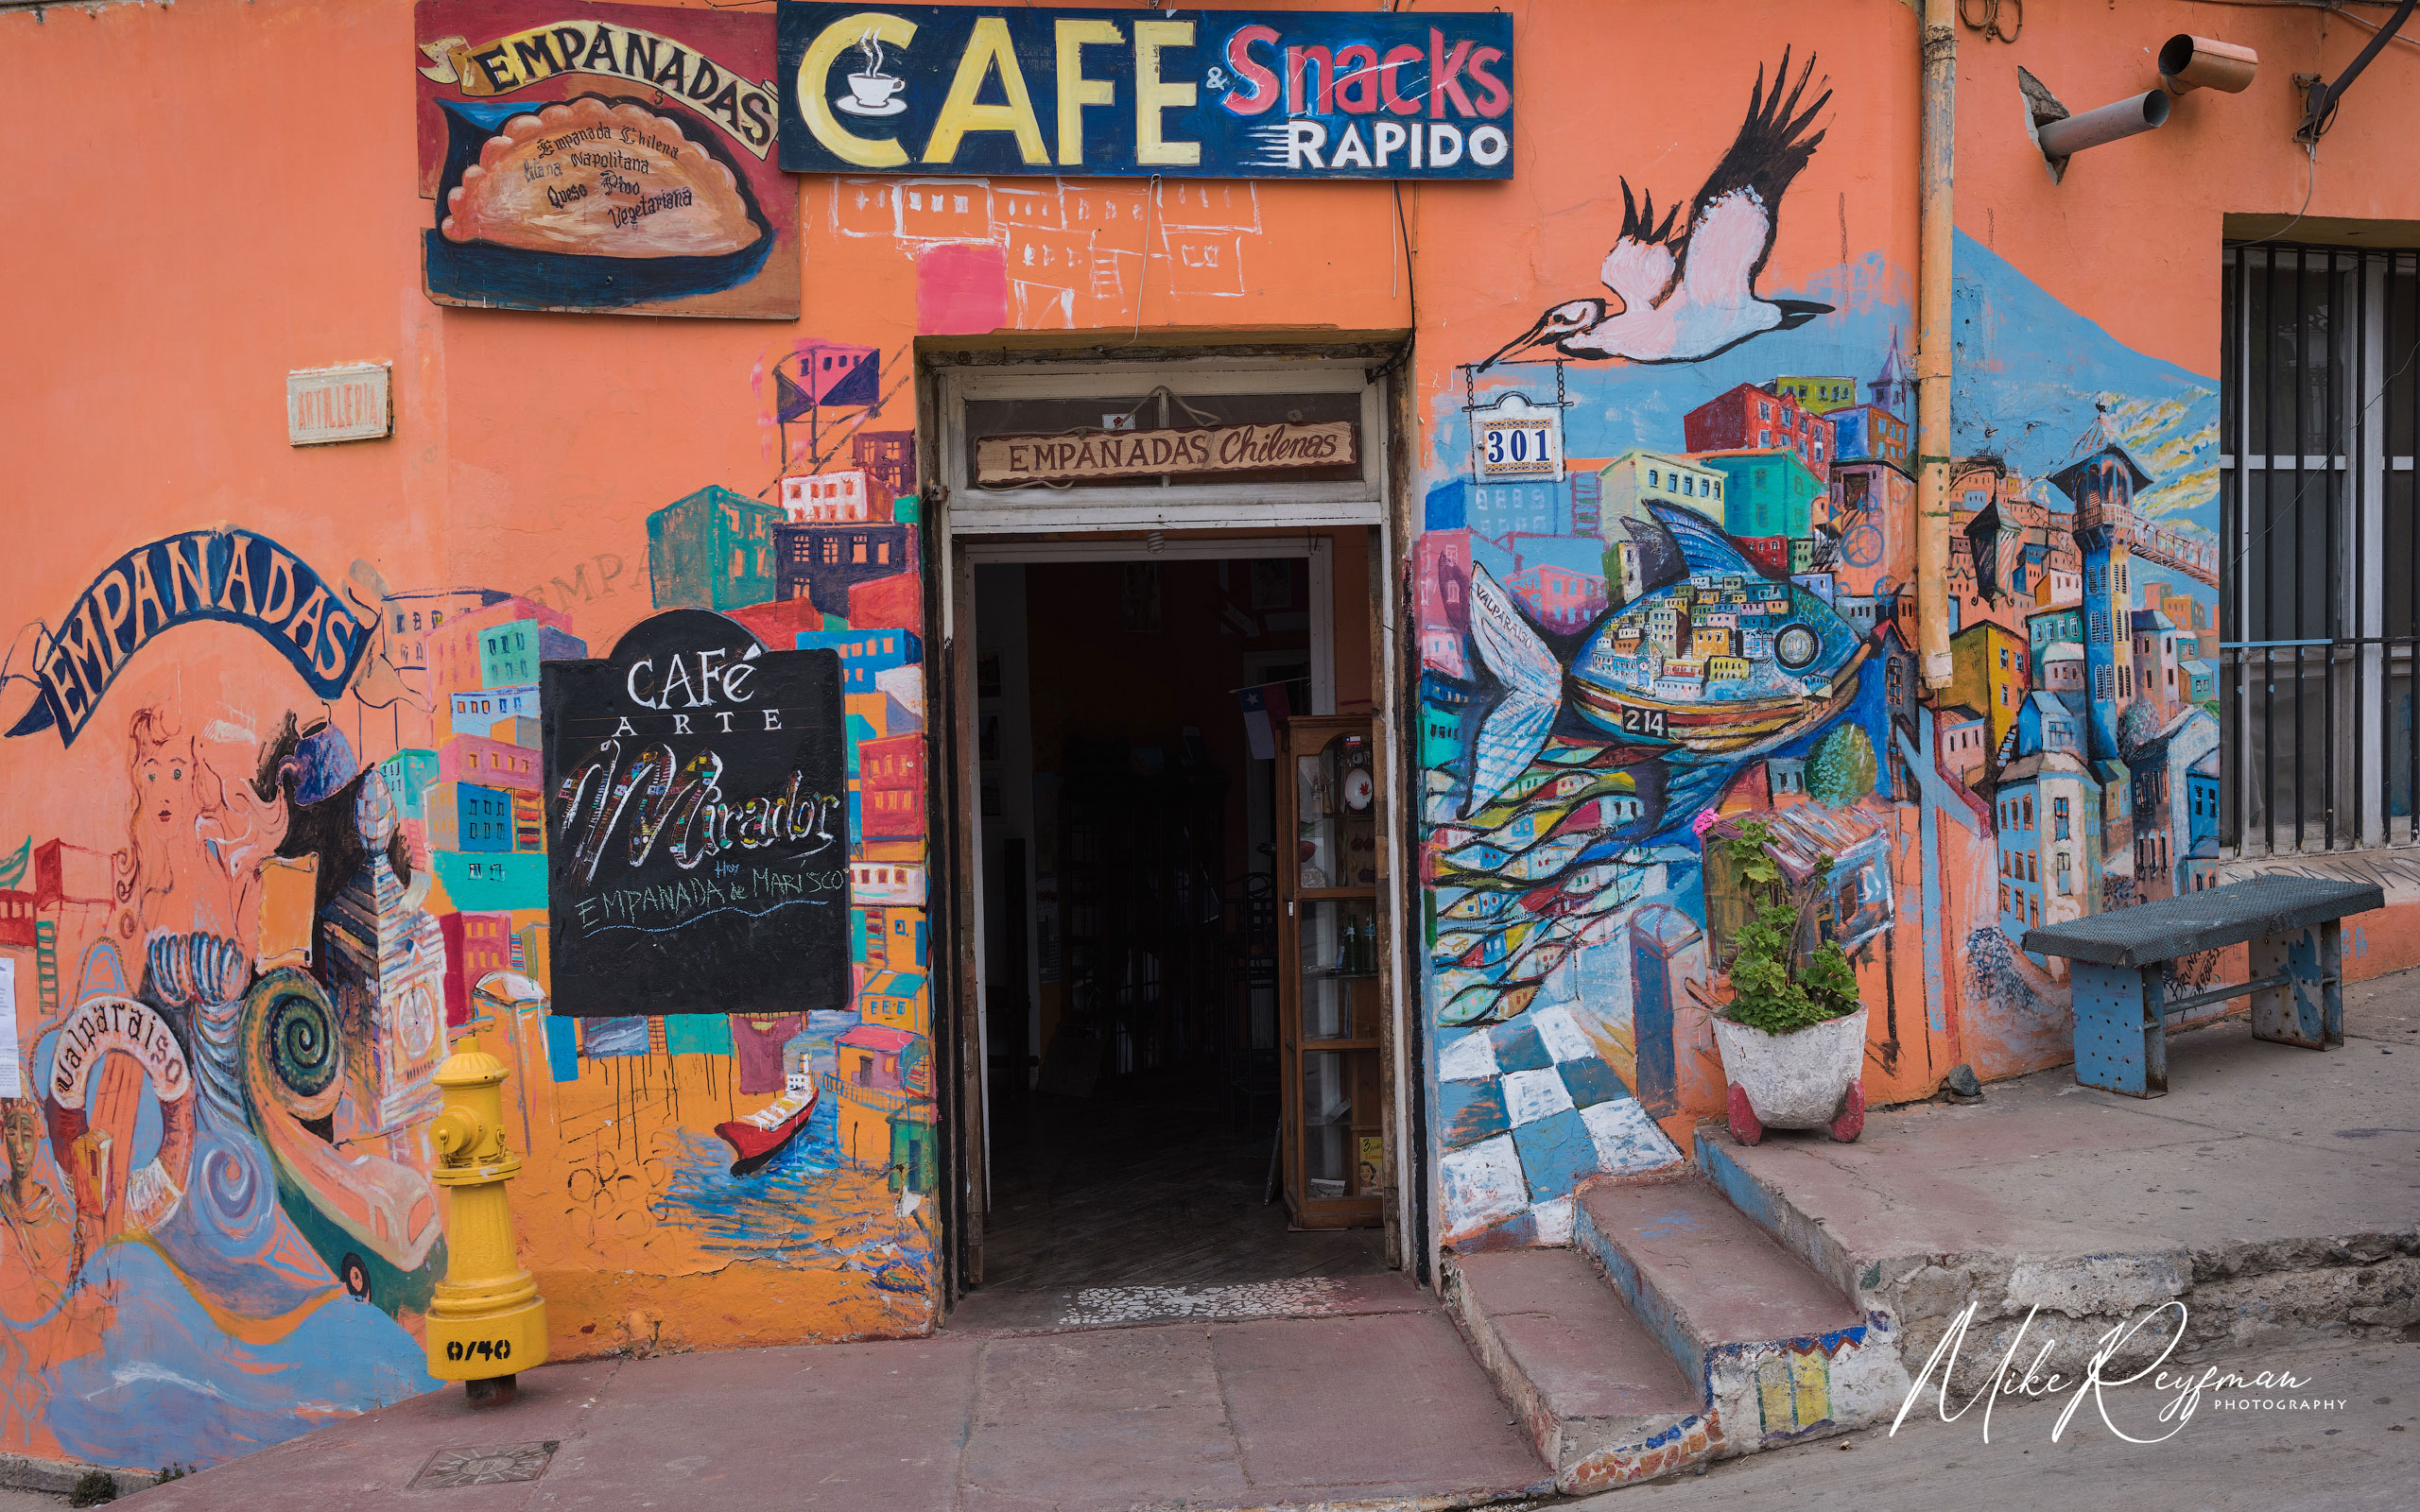 Valparaiso, Chile. The Graffiti Capital of the World 045-VP _D1D0291 - Valparaiso, Chile. The Graffiti Capital of the World - Mike Reyfman Photography